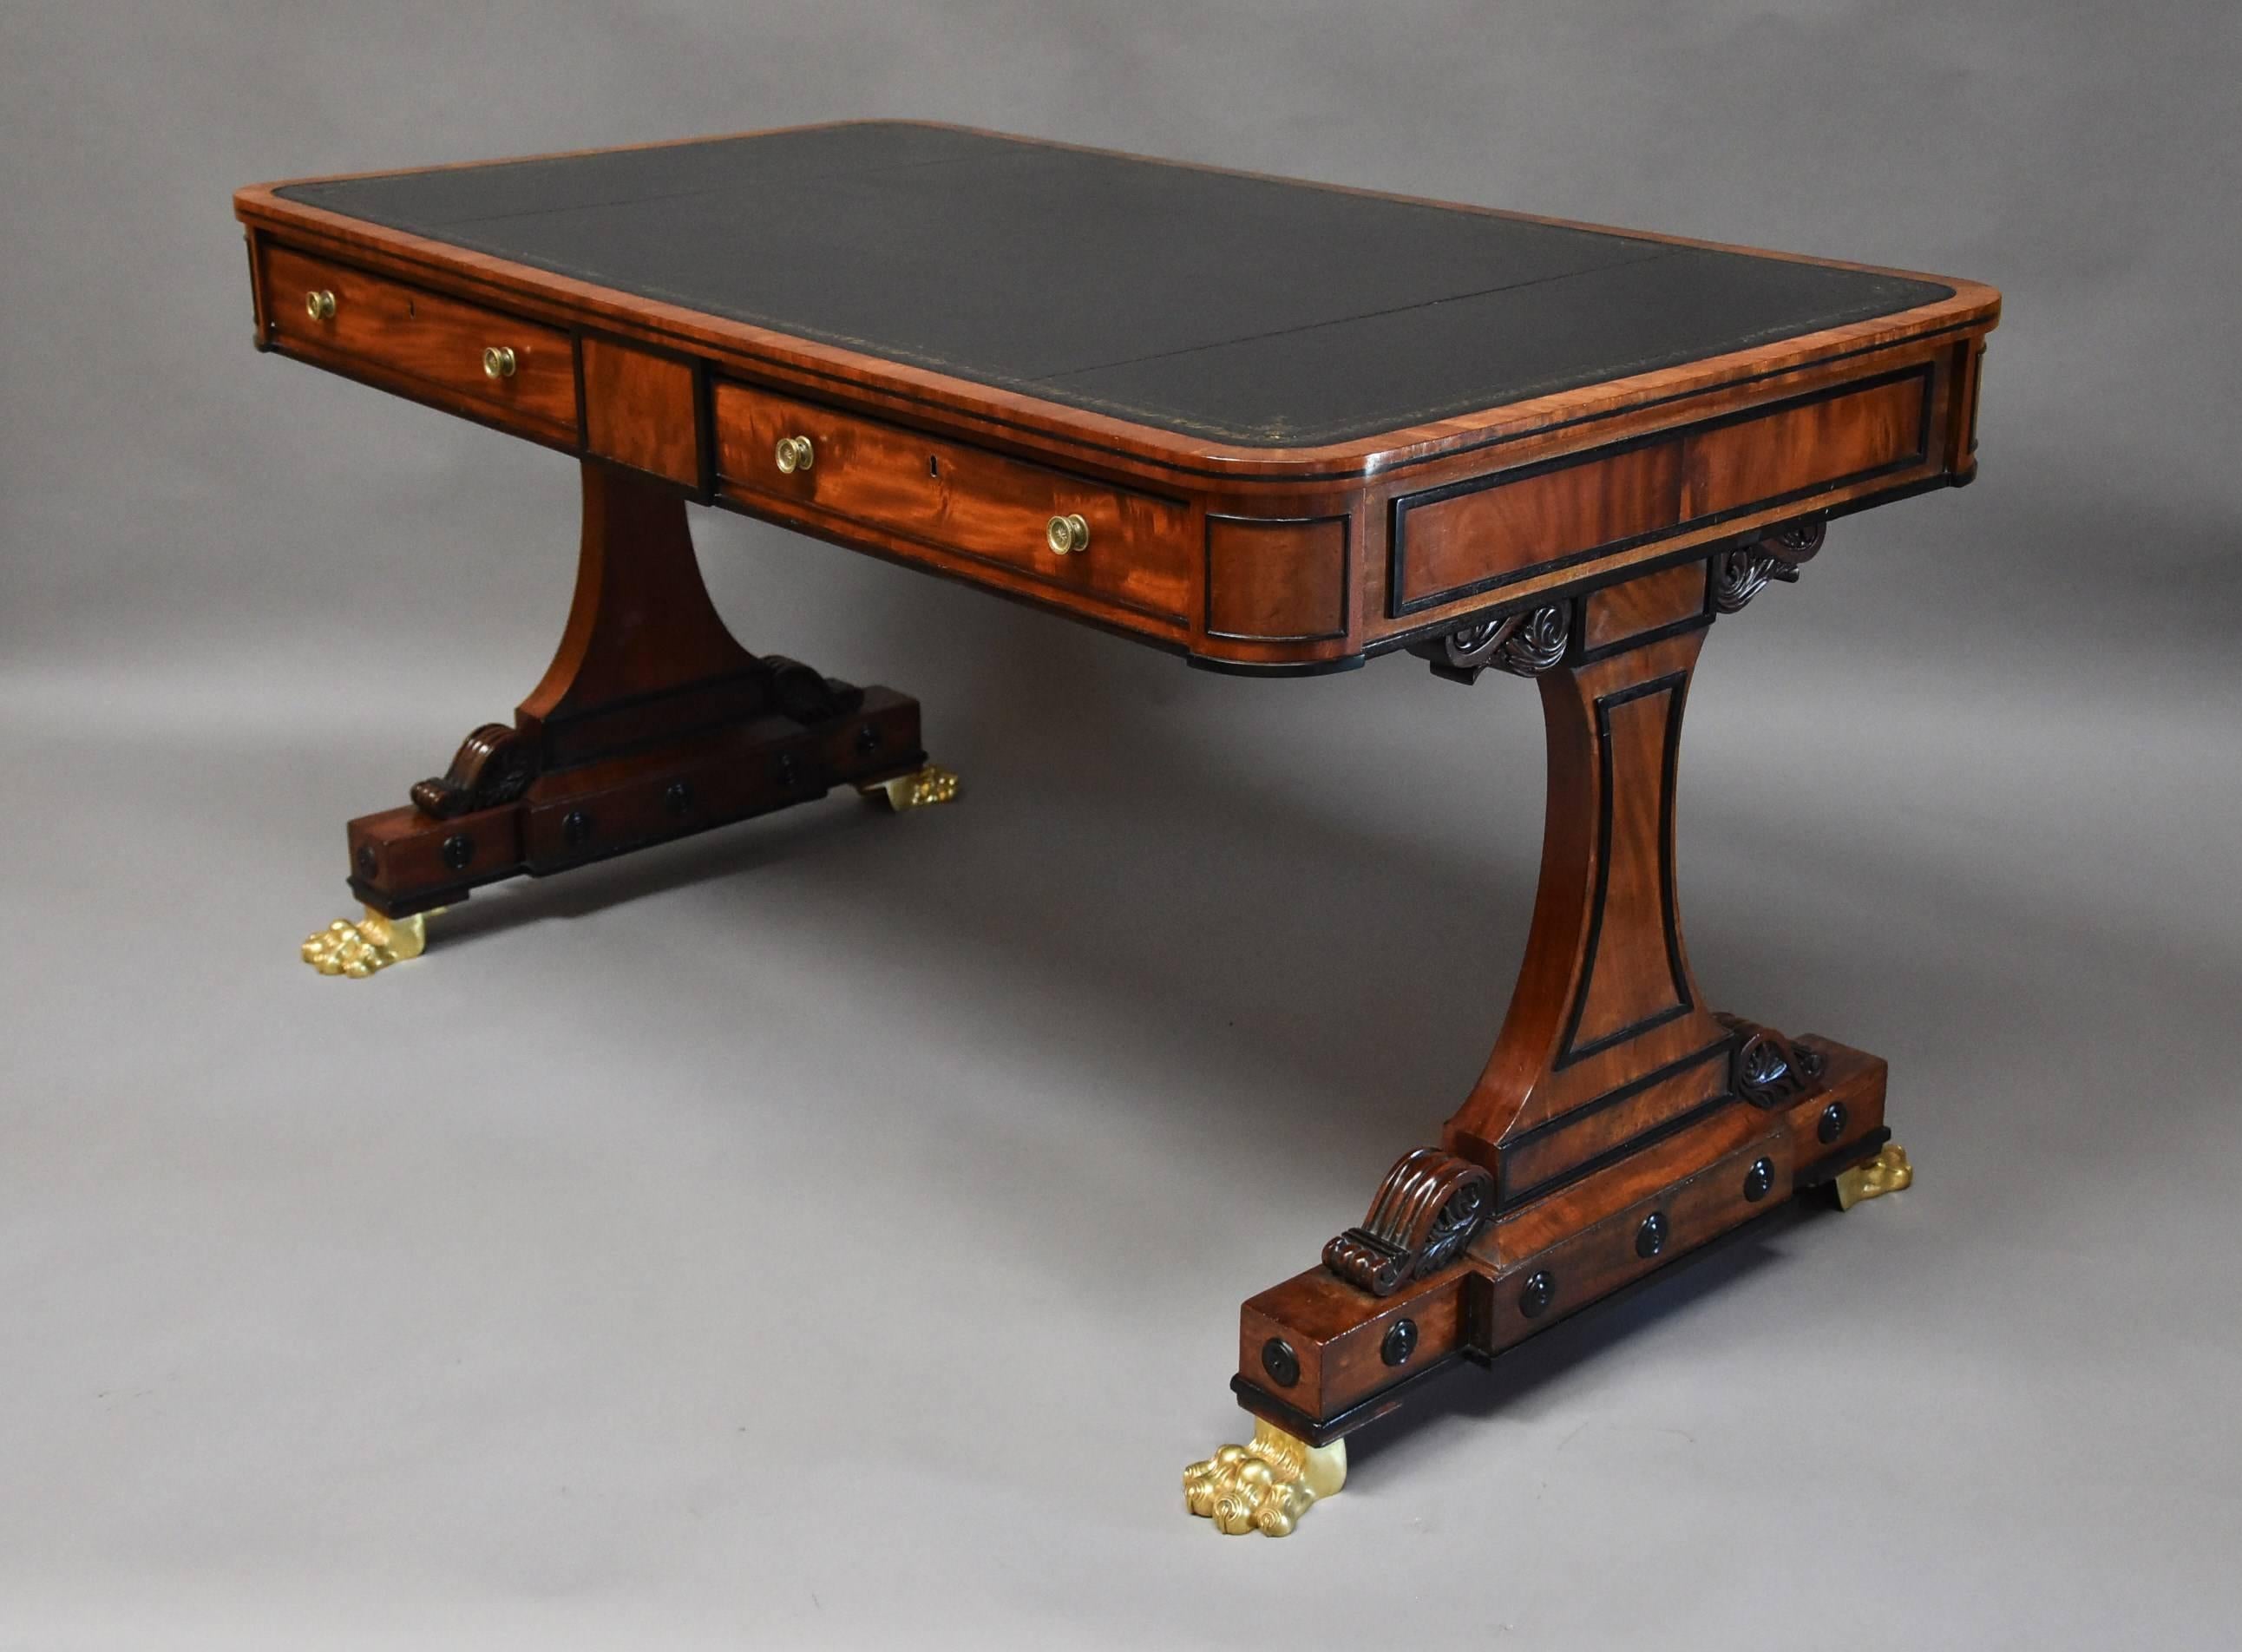 A fine quality Regency mahogany writing table of rectangular form.

This table consists of a black leather tooled top surrounded by a mahogany crossbanding leading down to a crossbanded mahogany edge with ebony black line.

The two drawers to